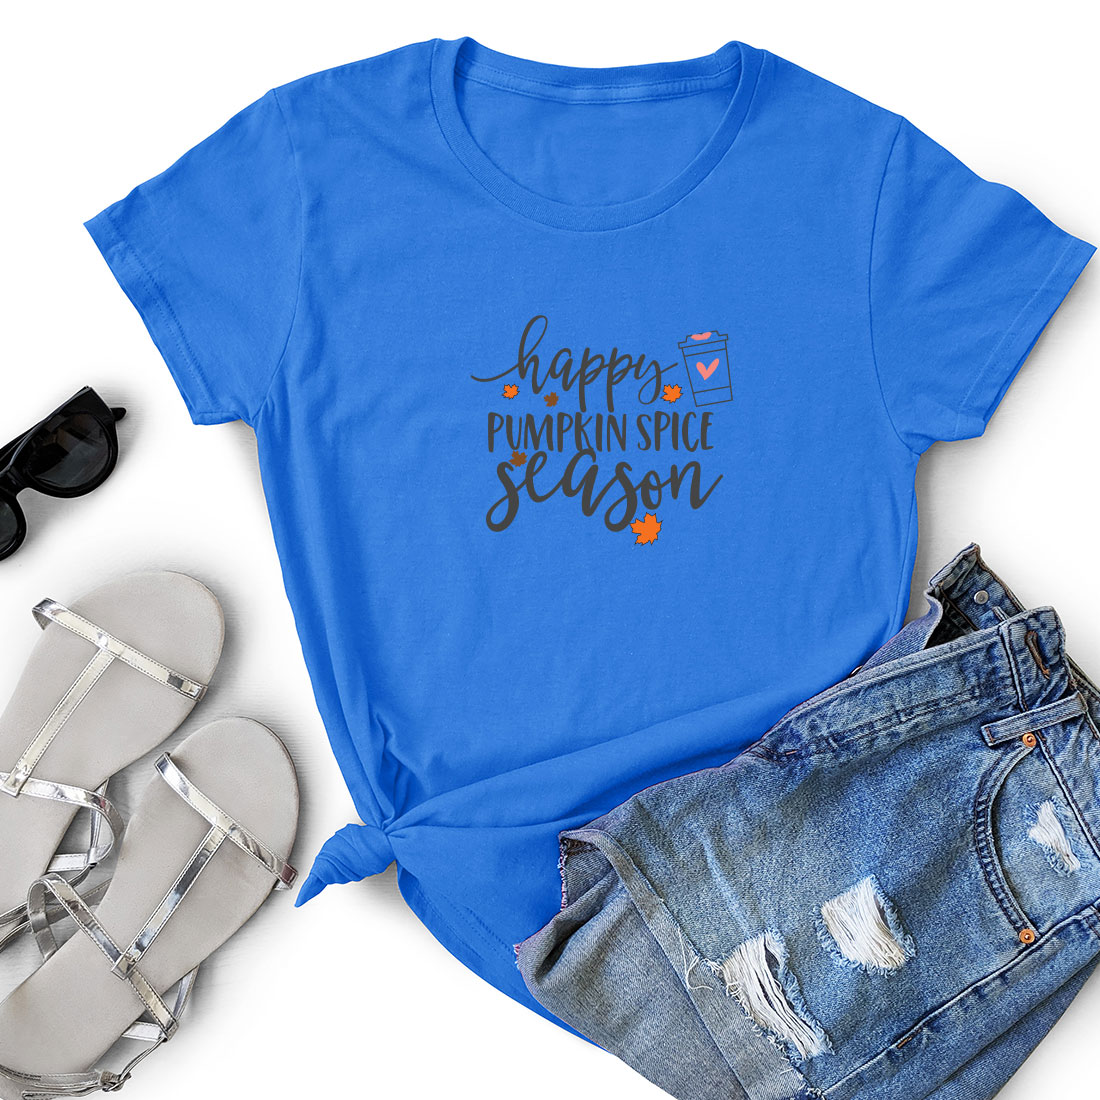 T - shirt that says happy pumpkin spice season next to a pair of shorts.